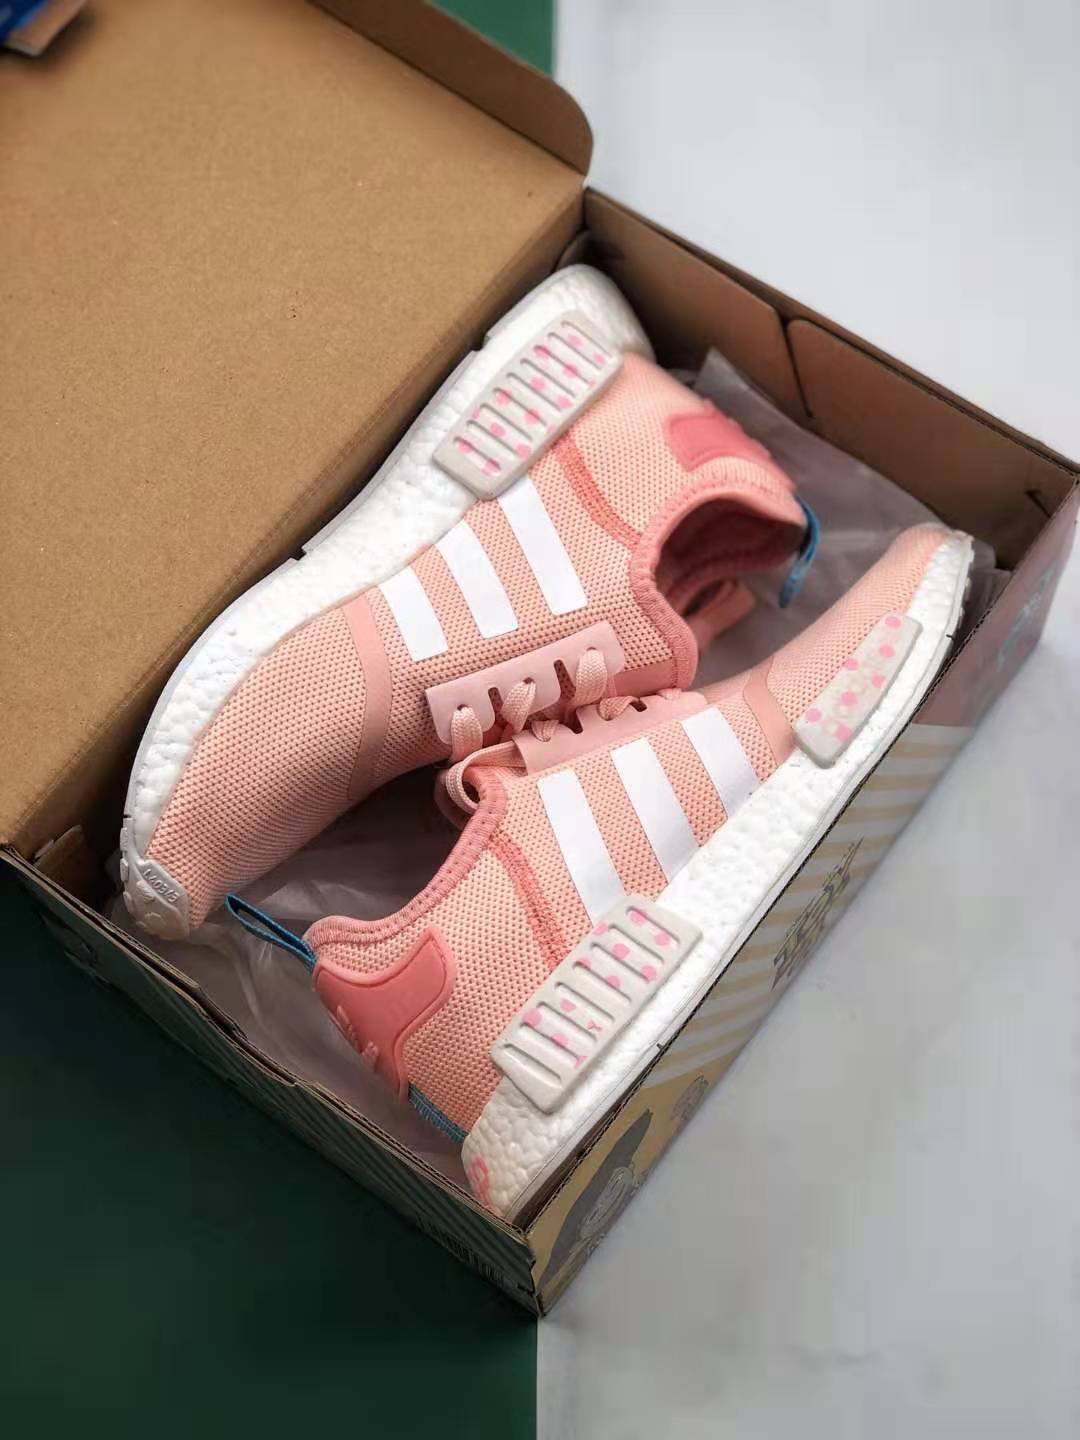 Adidas Toy Story 4 x NMD_R1 'Bo Peep' EG7316 | Limited Edition Sneakers